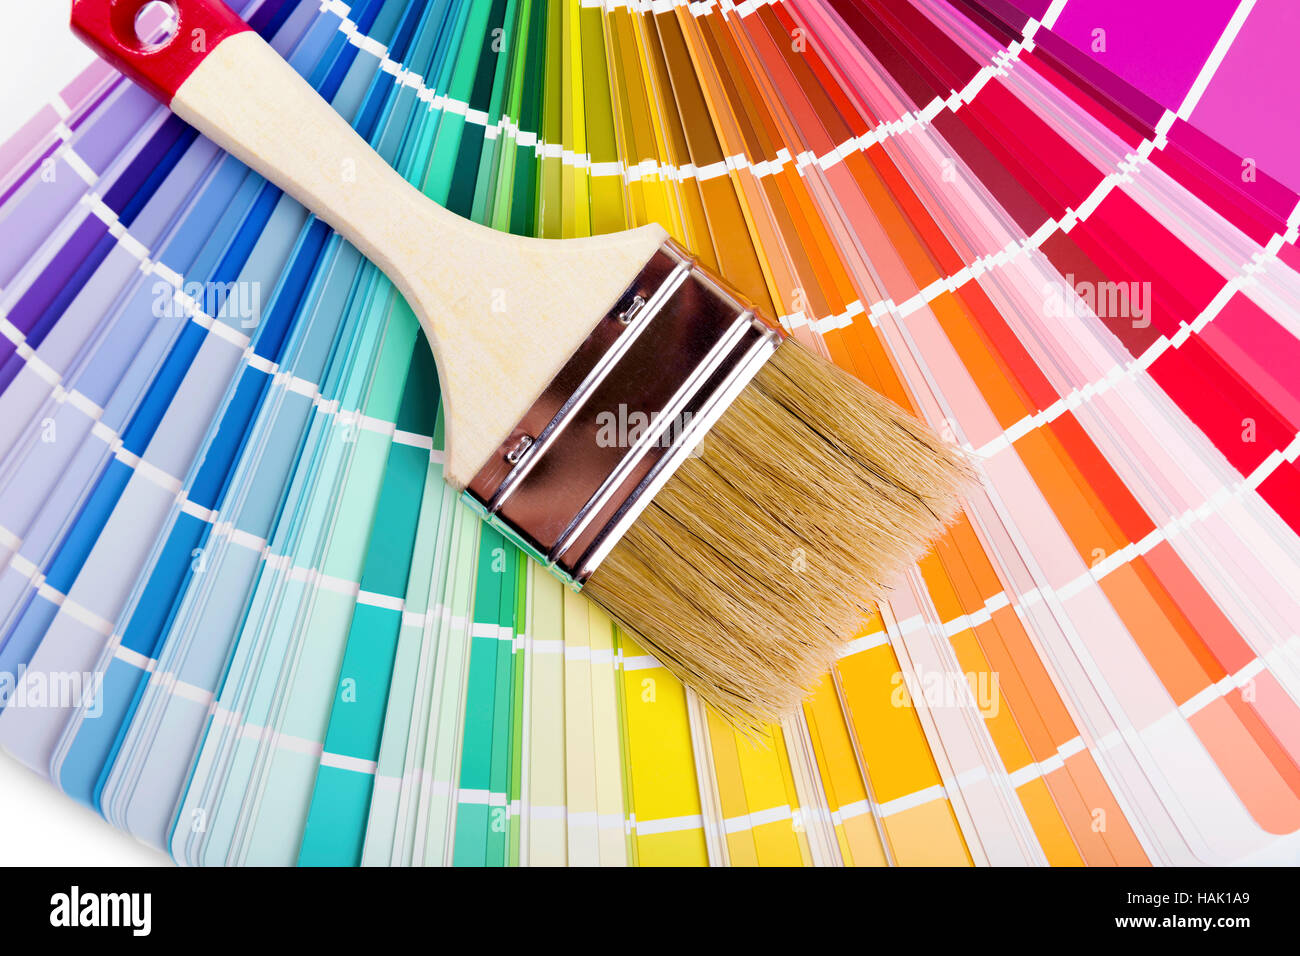 catalog with paint color samples and brush Stock Photo